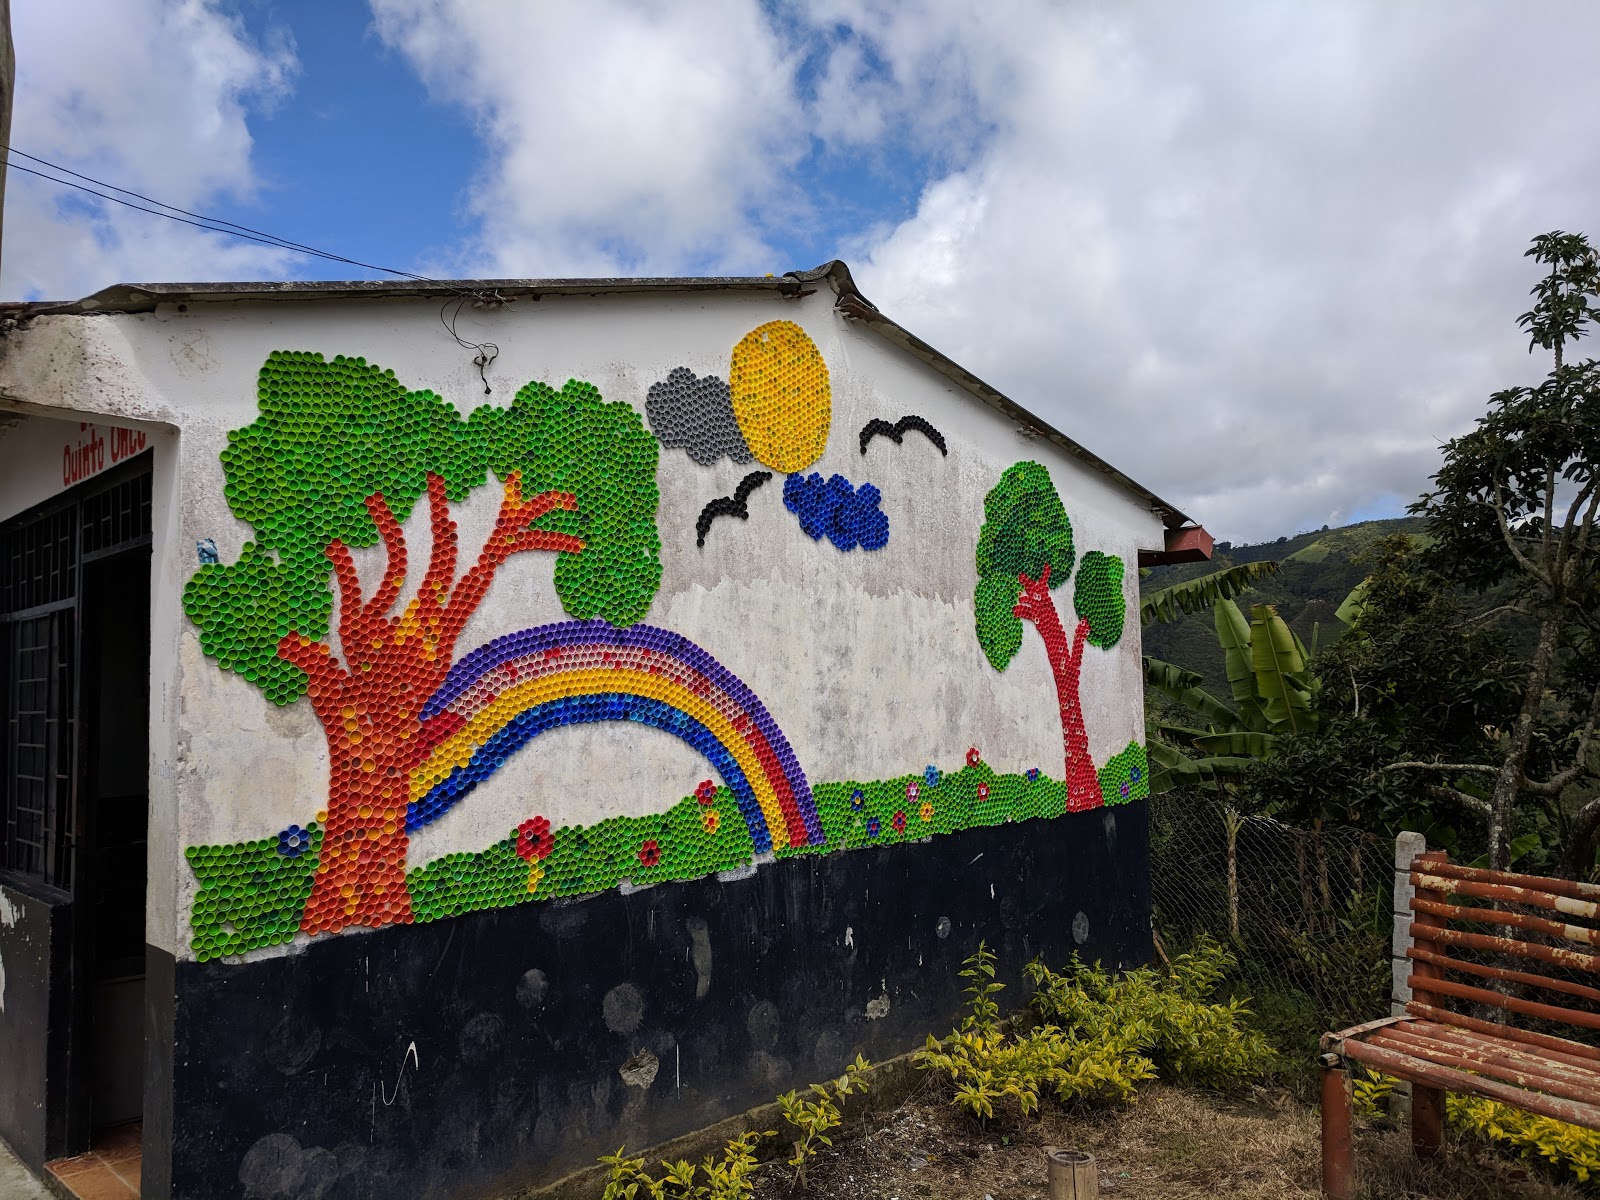 Mural on a school of trees, sun, clouds, birds and a rainbow made of brightly coloiured plastic bottle caps